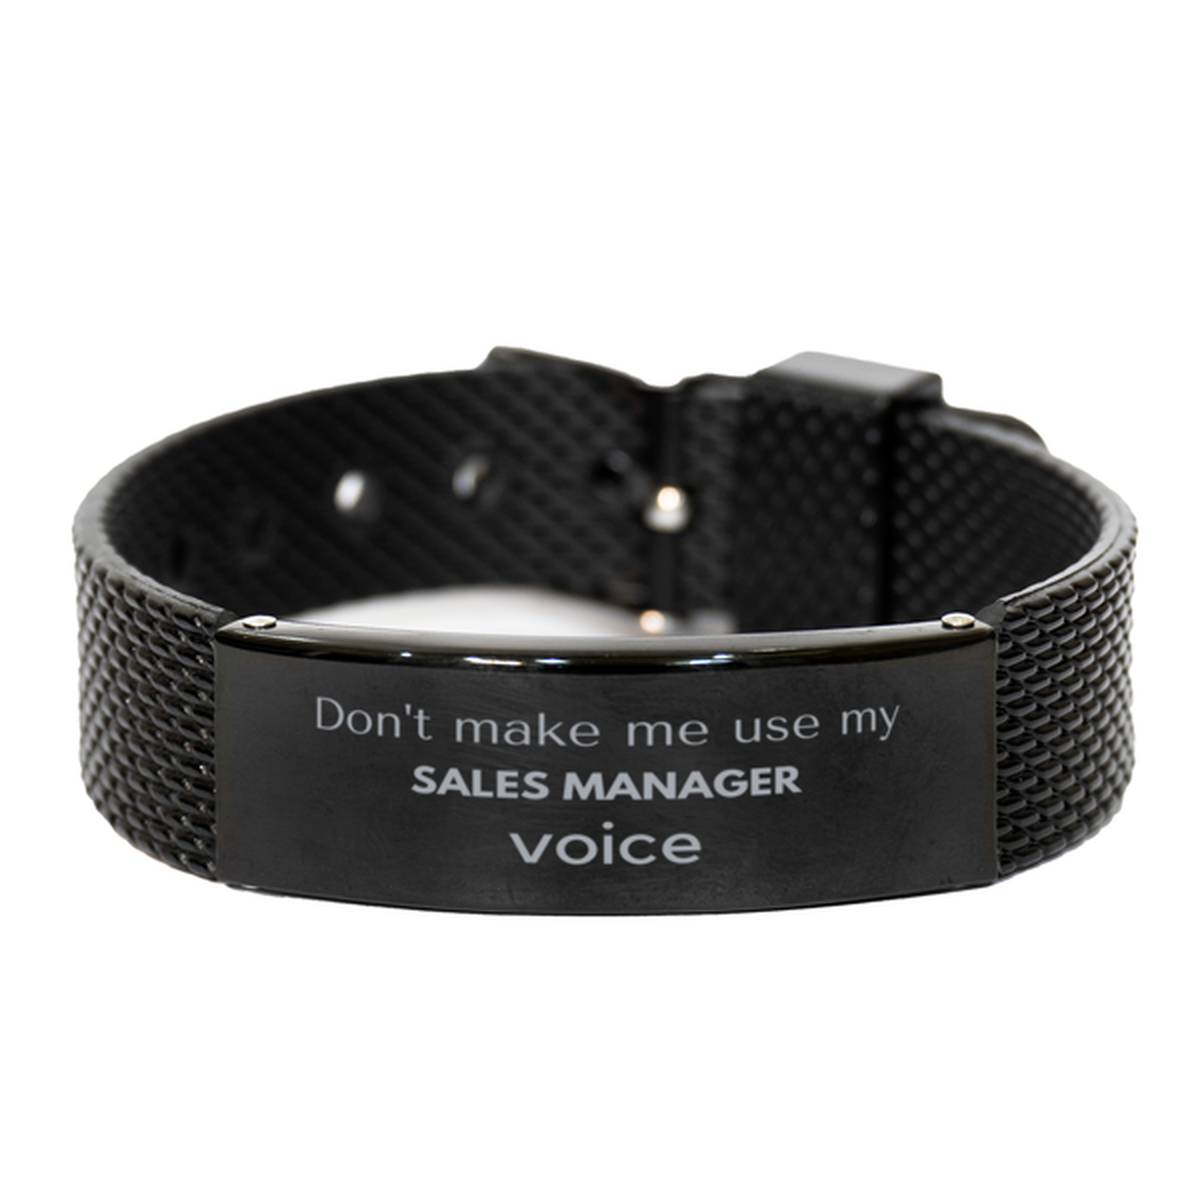 Don't make me use my Sales Manager voice, Sarcasm Sales Manager Gifts, Christmas Sales Manager Black Shark Mesh Bracelet Birthday Unique Gifts For Sales Manager Coworkers, Men, Women, Colleague, Friends